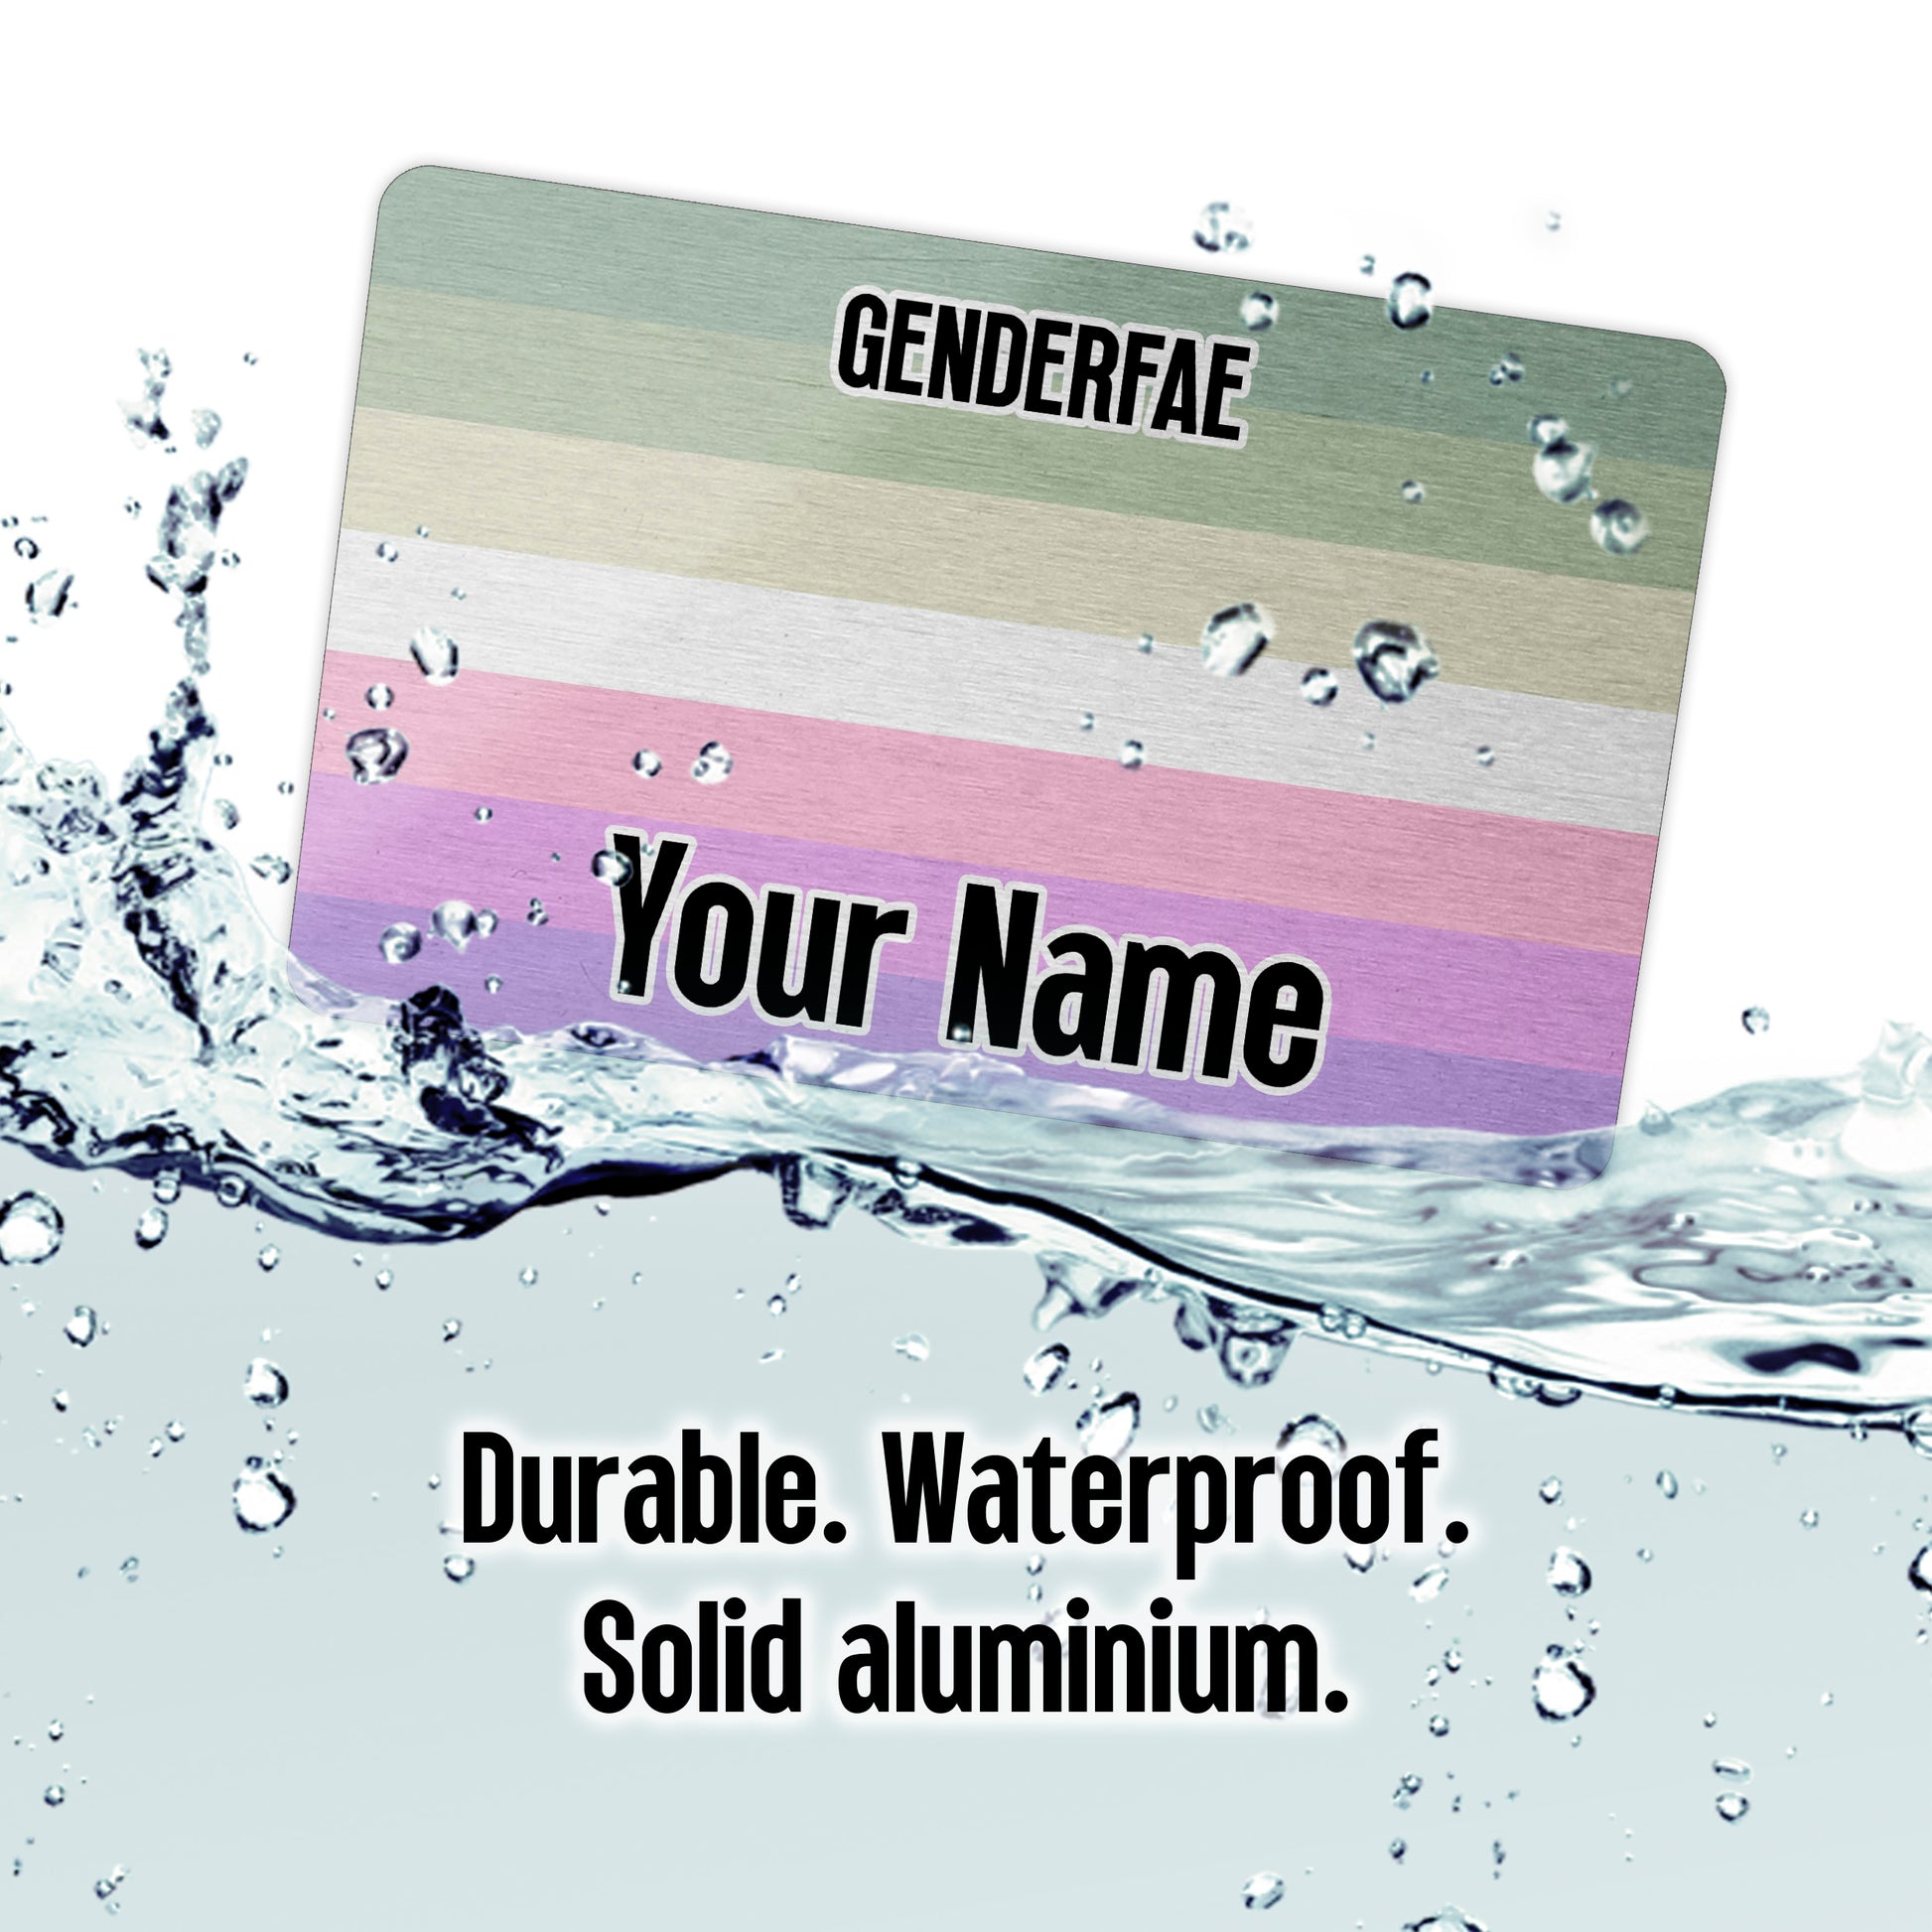 Aluminium wallet card personalised with your name and the genderfae pride flag